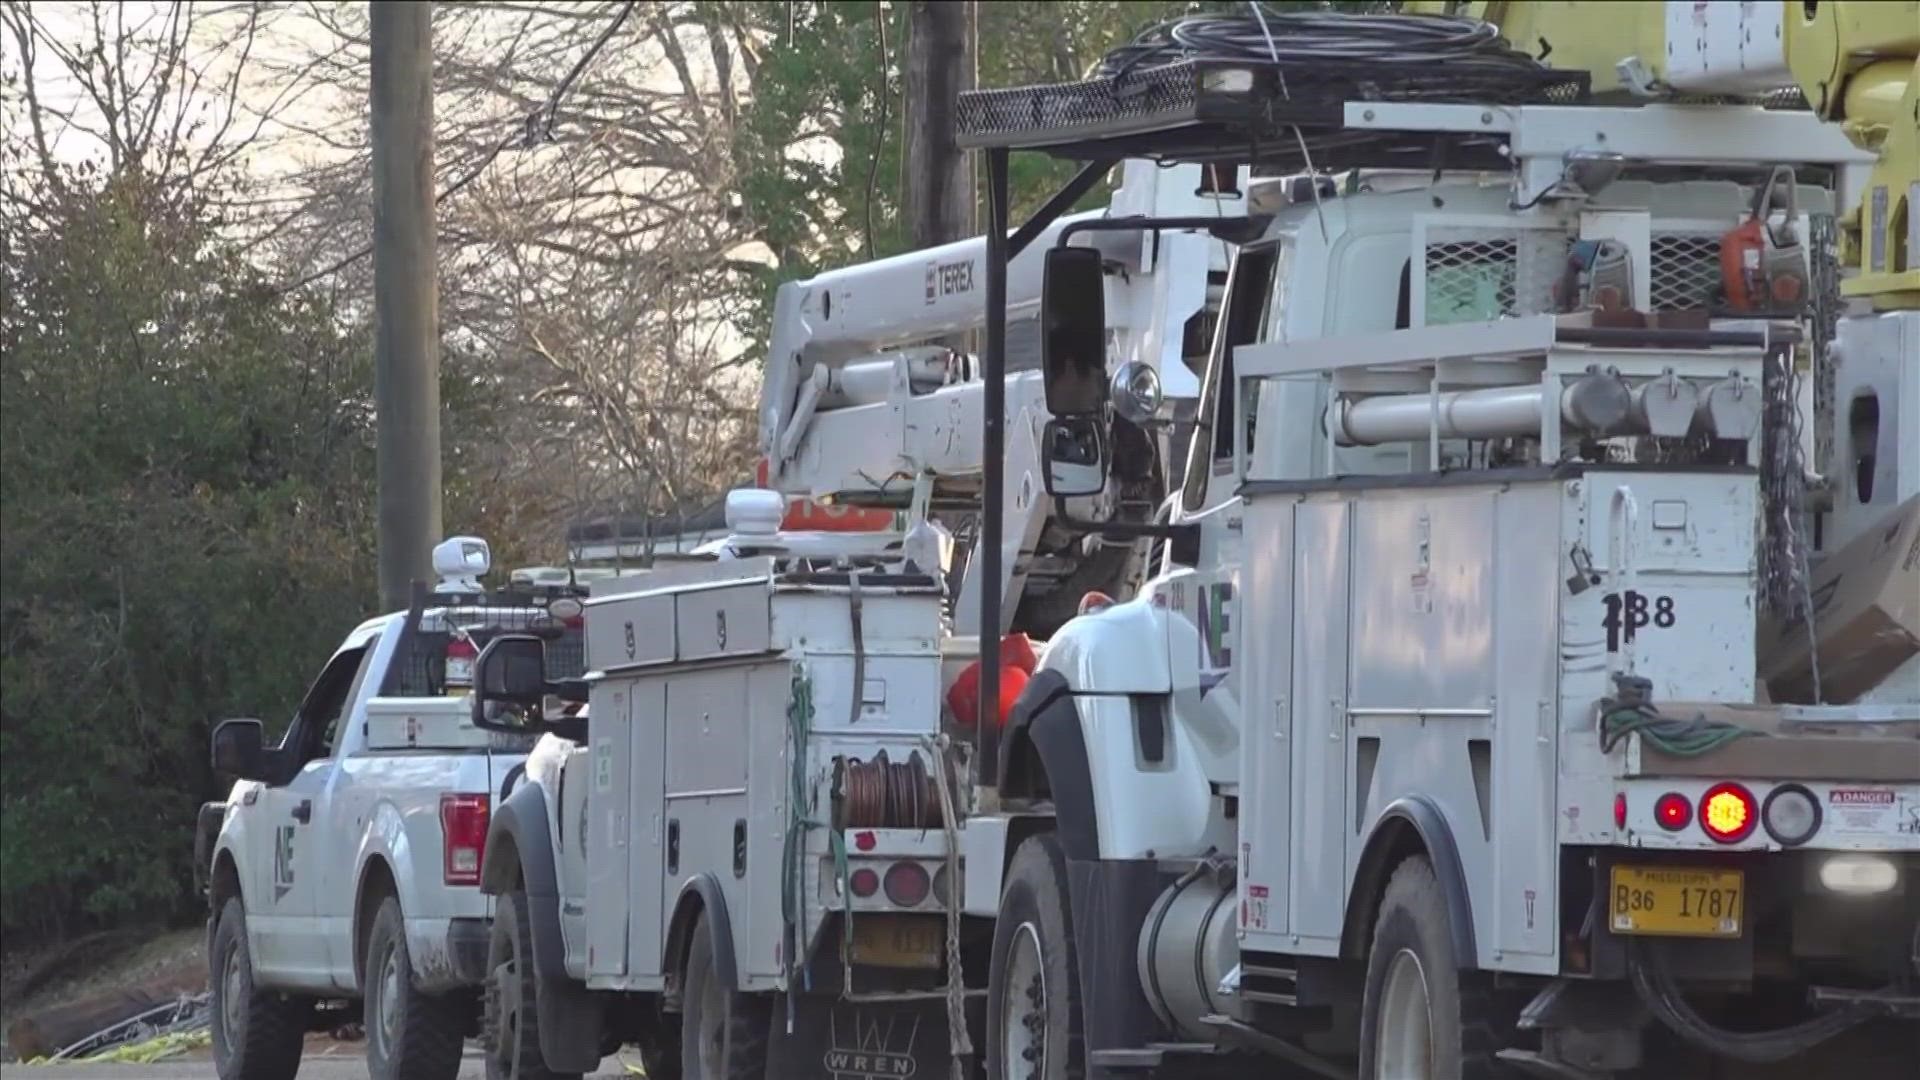 The ice storm caused thousands of outages for businesses and homes.